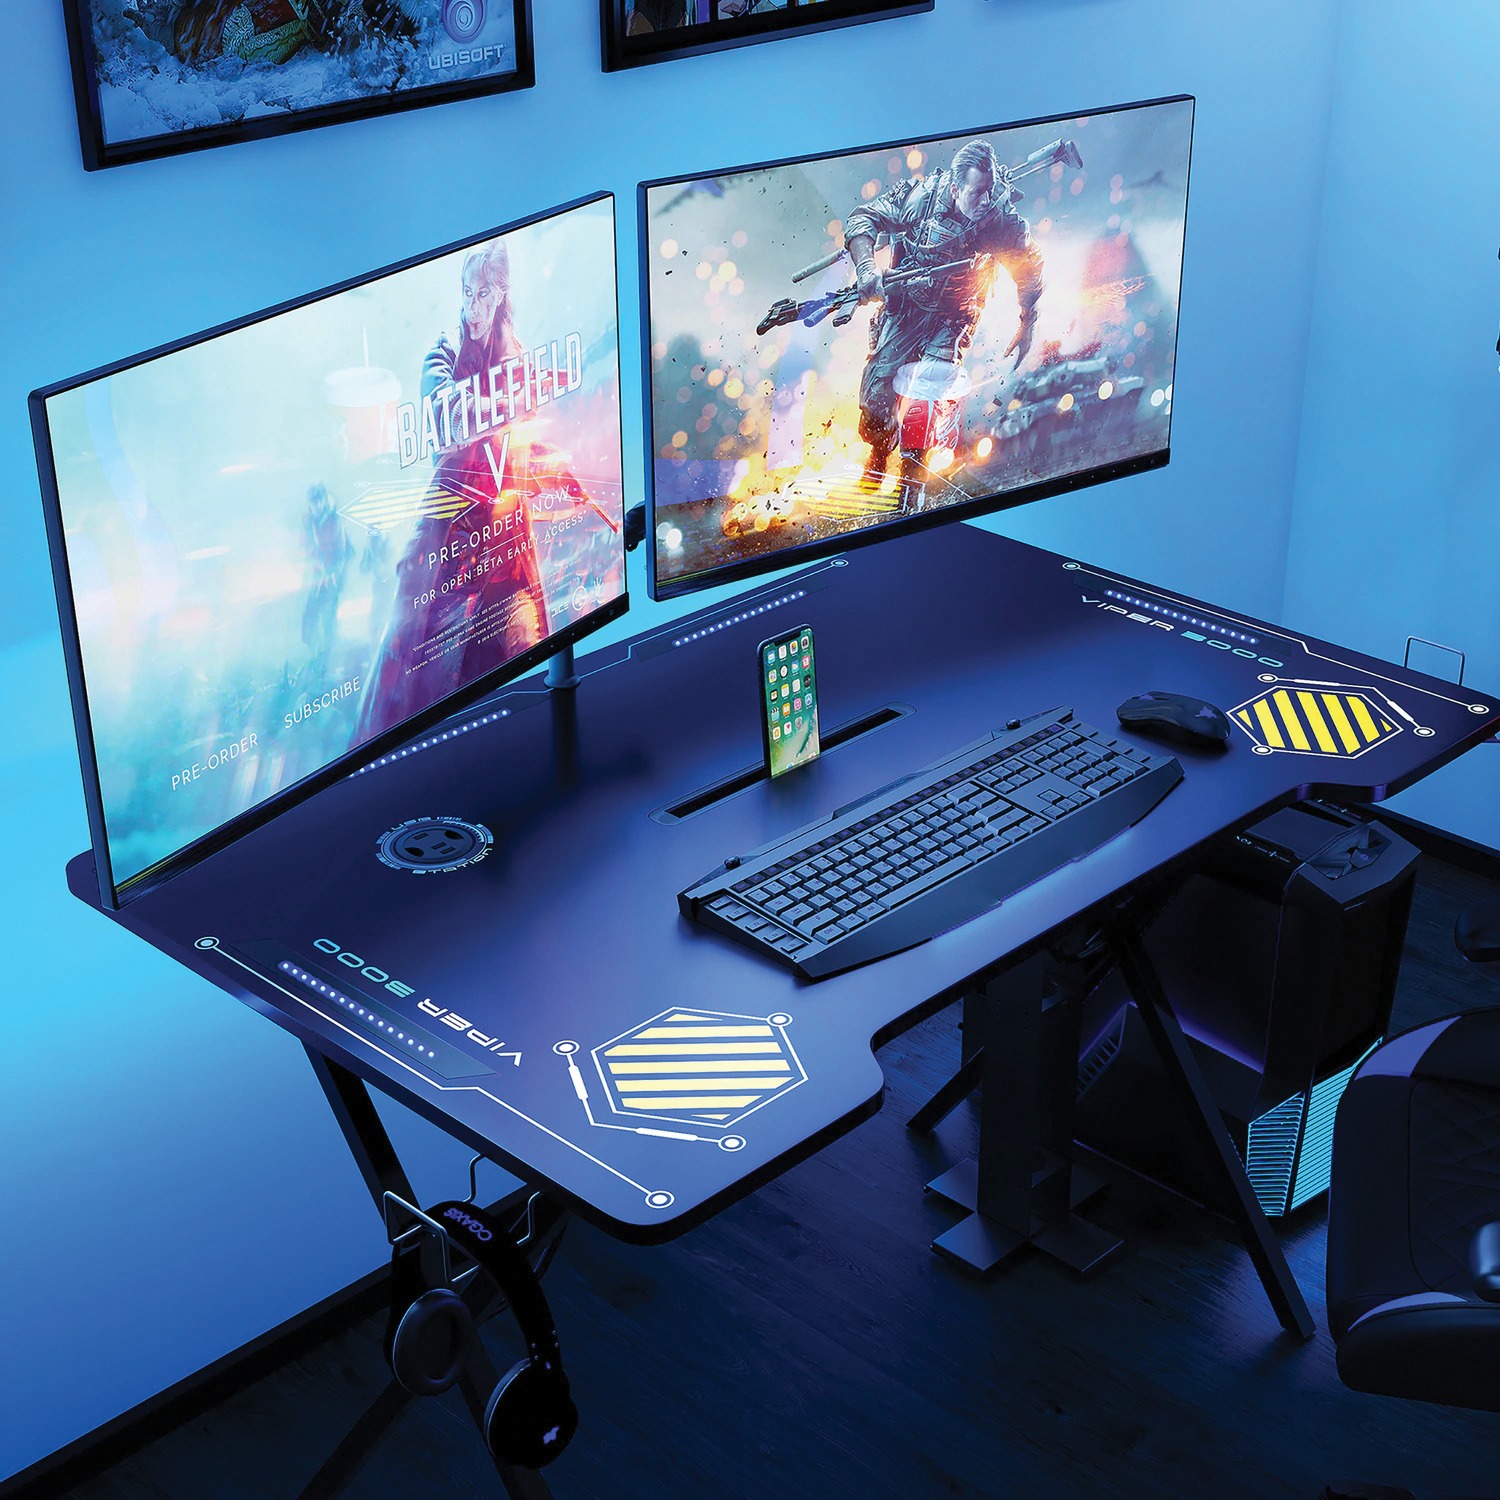 Atlantic Viper 3000 Gaming Desk with LED Lights, 52.5"W x 32.5" D x 29.6"H, Black - image 5 of 8